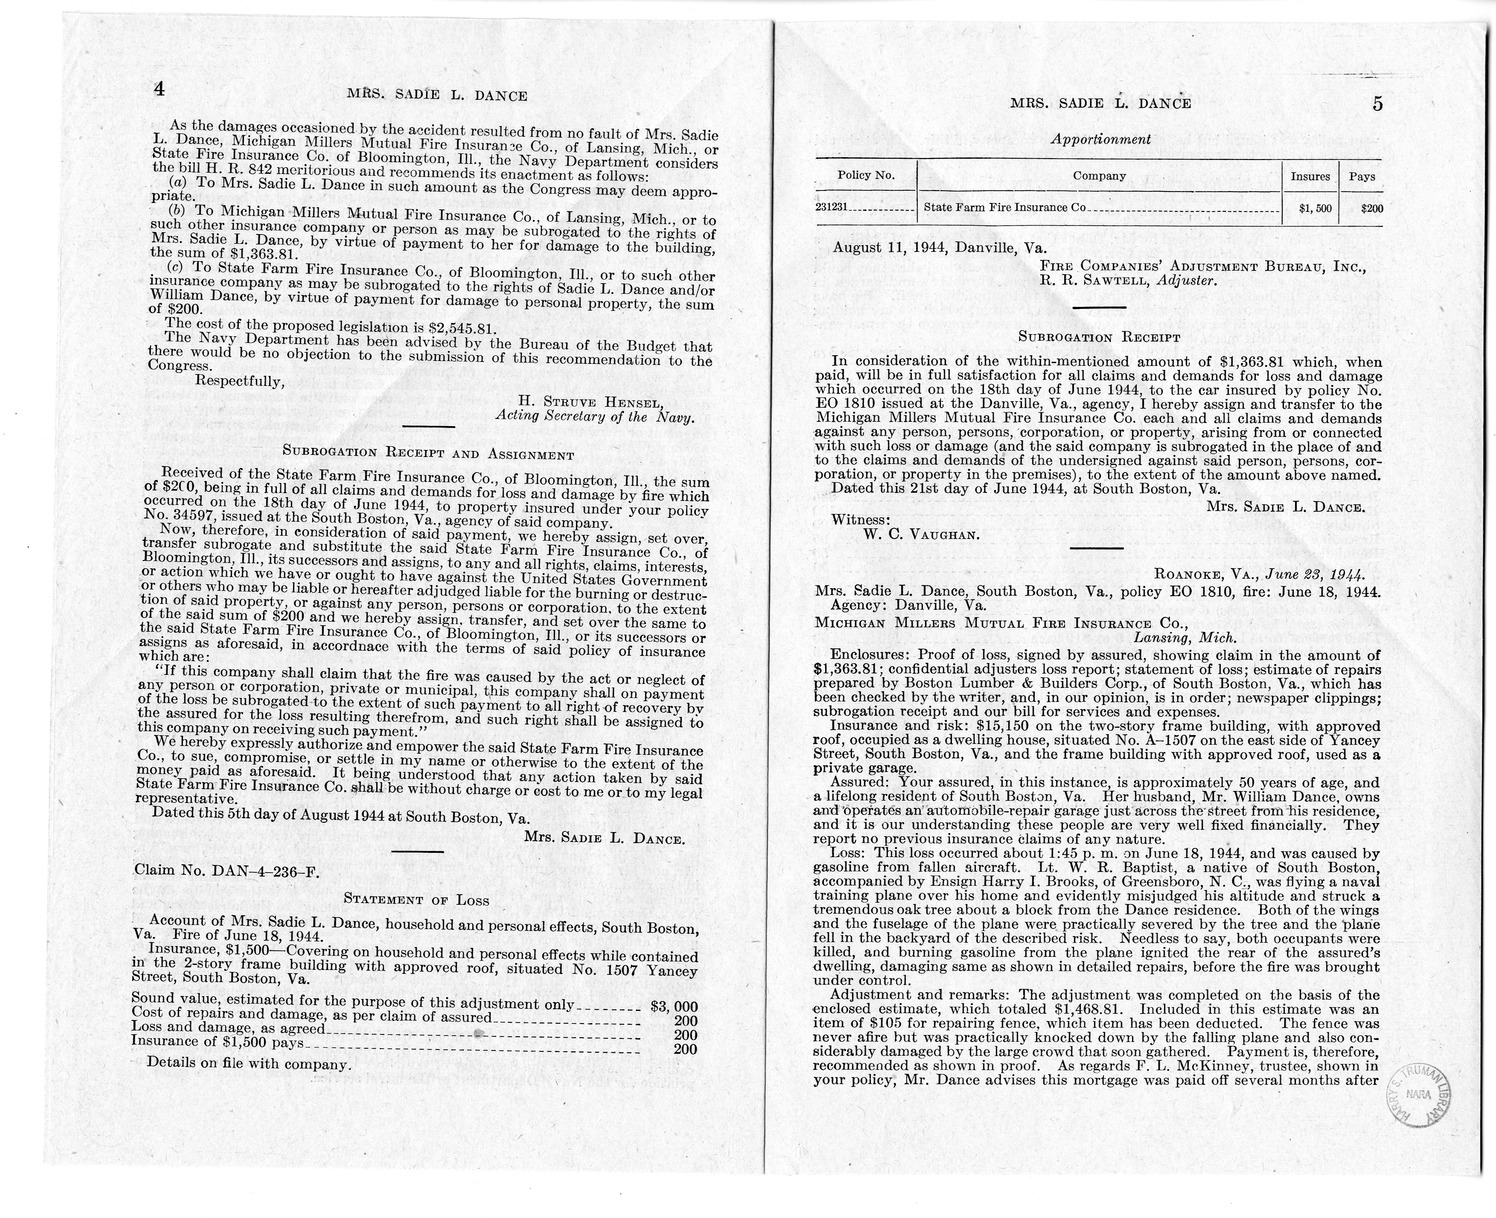 Memorandum from Frederick Bailey to M. C. Latta, H.R. 842, For the Relief of Mrs. Sadie L. Dance, with Attachments